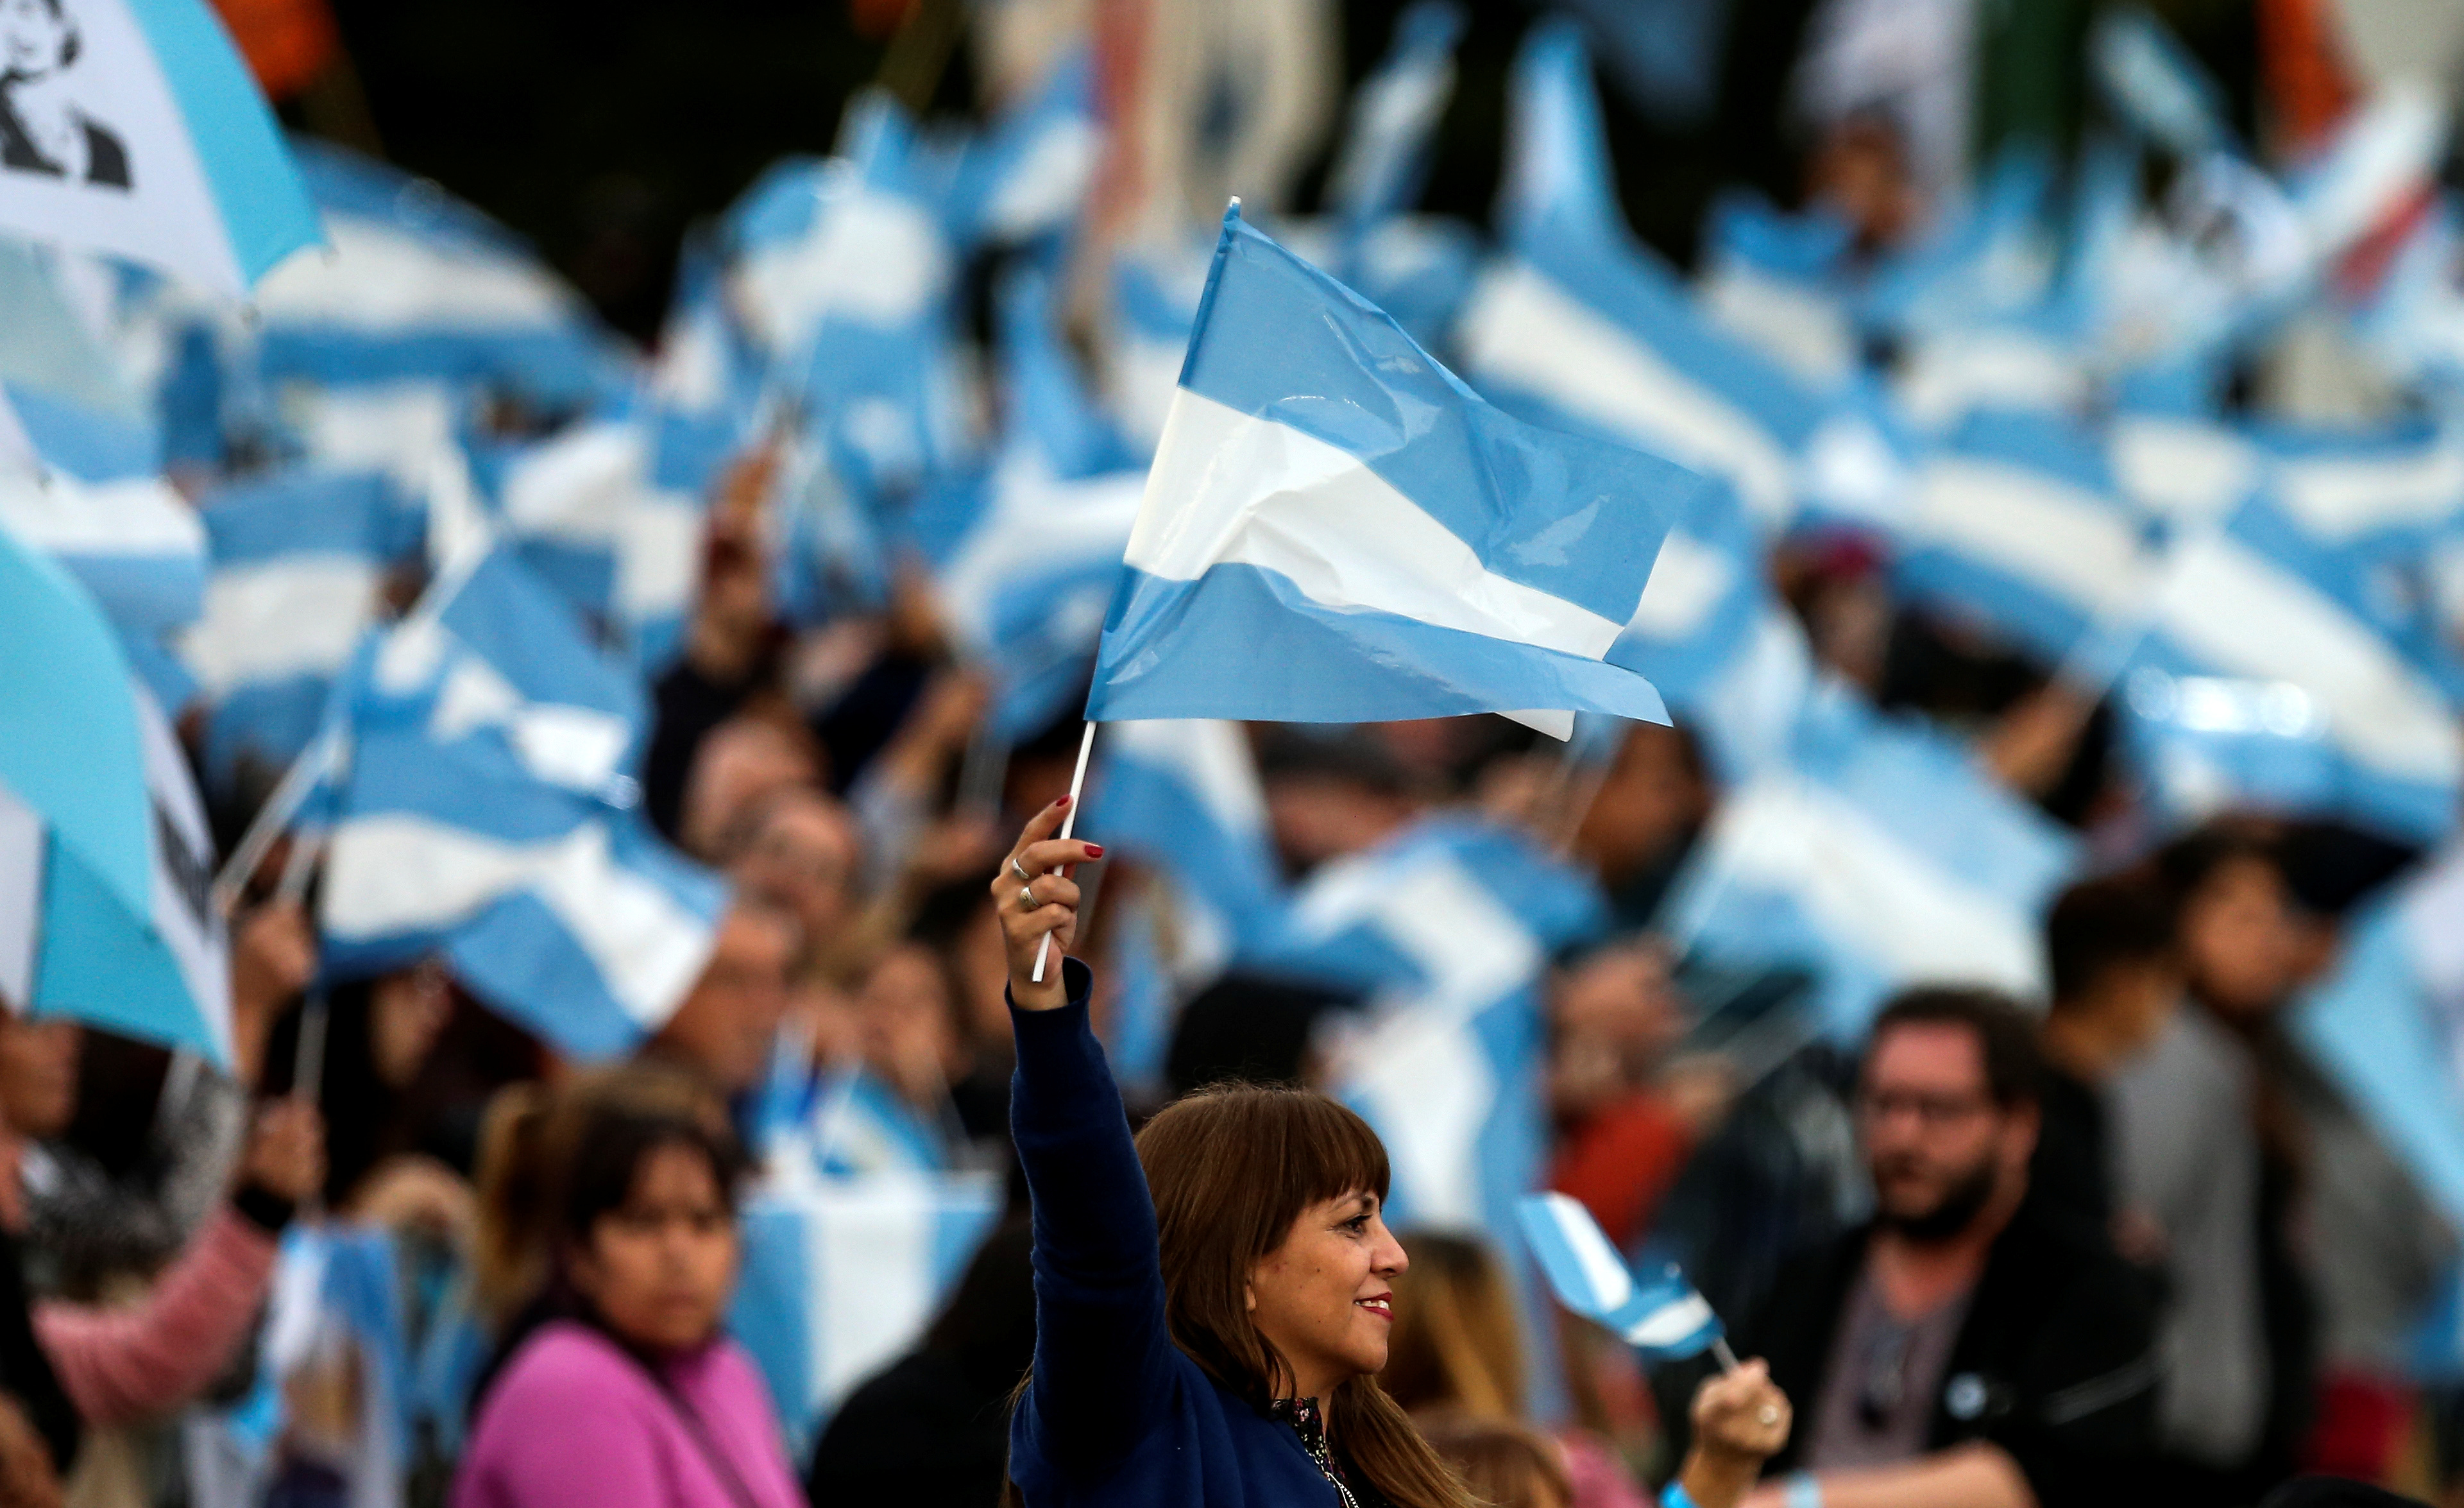 Supporters of Argentina's former President Cristina Fernandez de Kirchner chant slogans before a rally in Merlo, in Buenos Aires